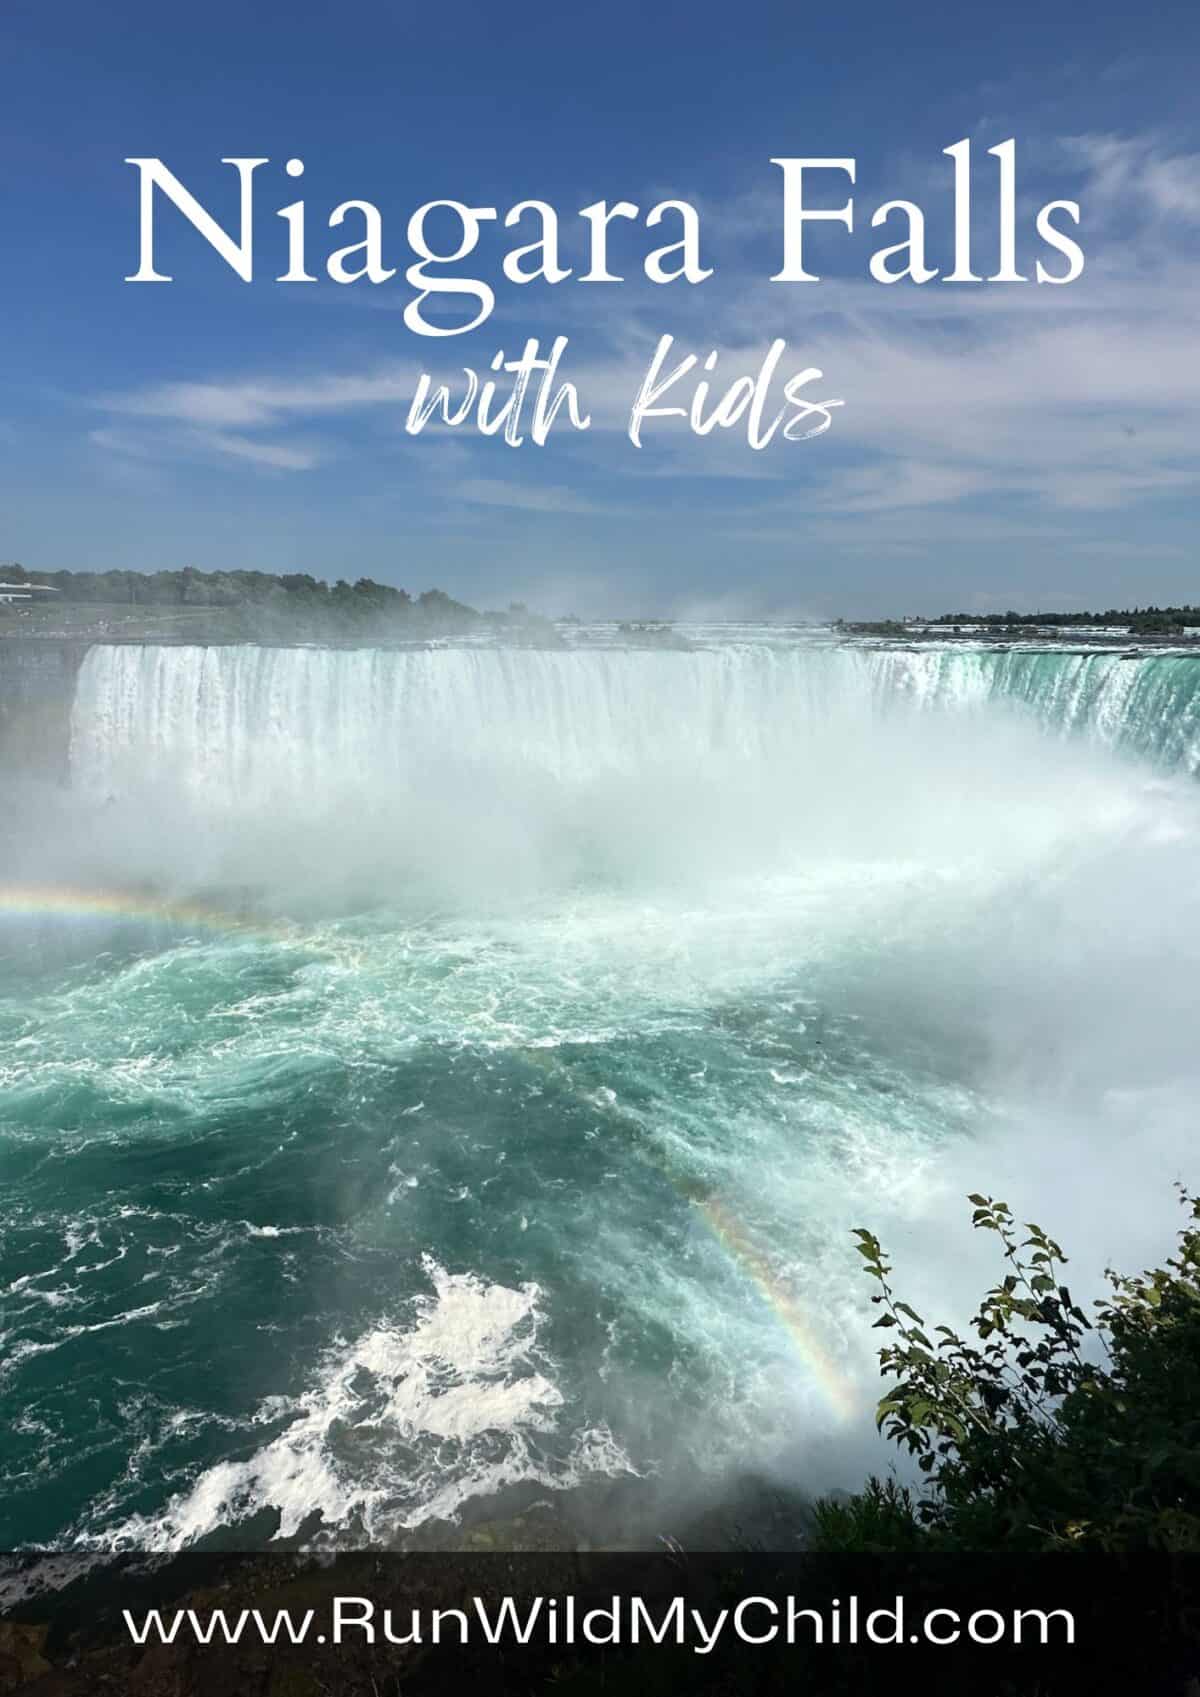 Cover photo for Niagara Falls with kids